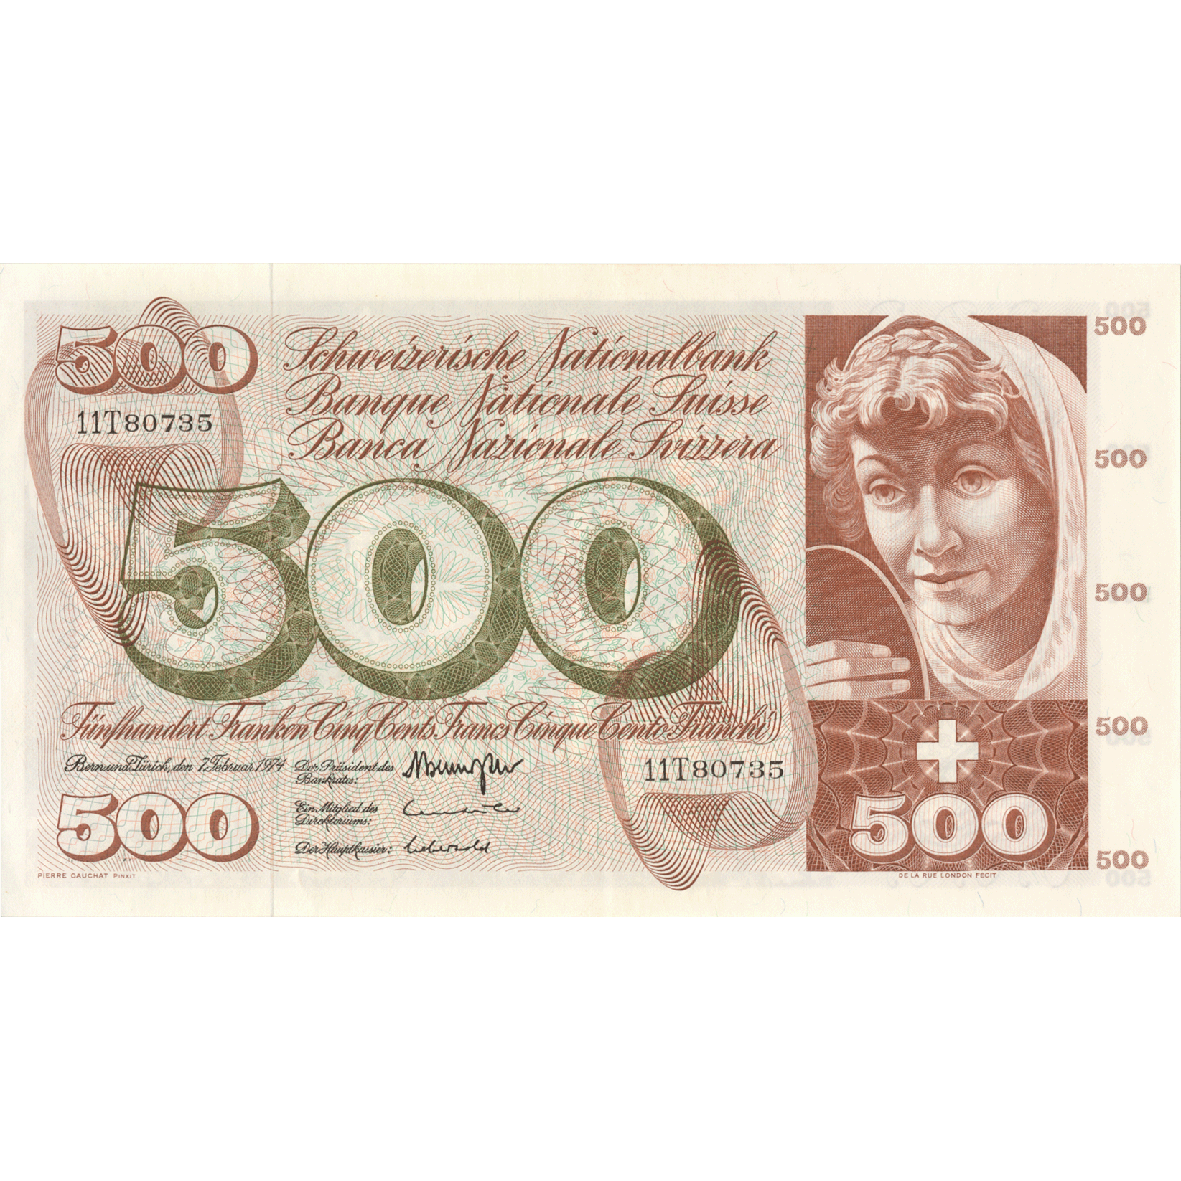 Swiss Confederation, 500 Francs (5th Banknote Series, in Circulation 1956-1980) (obverse)